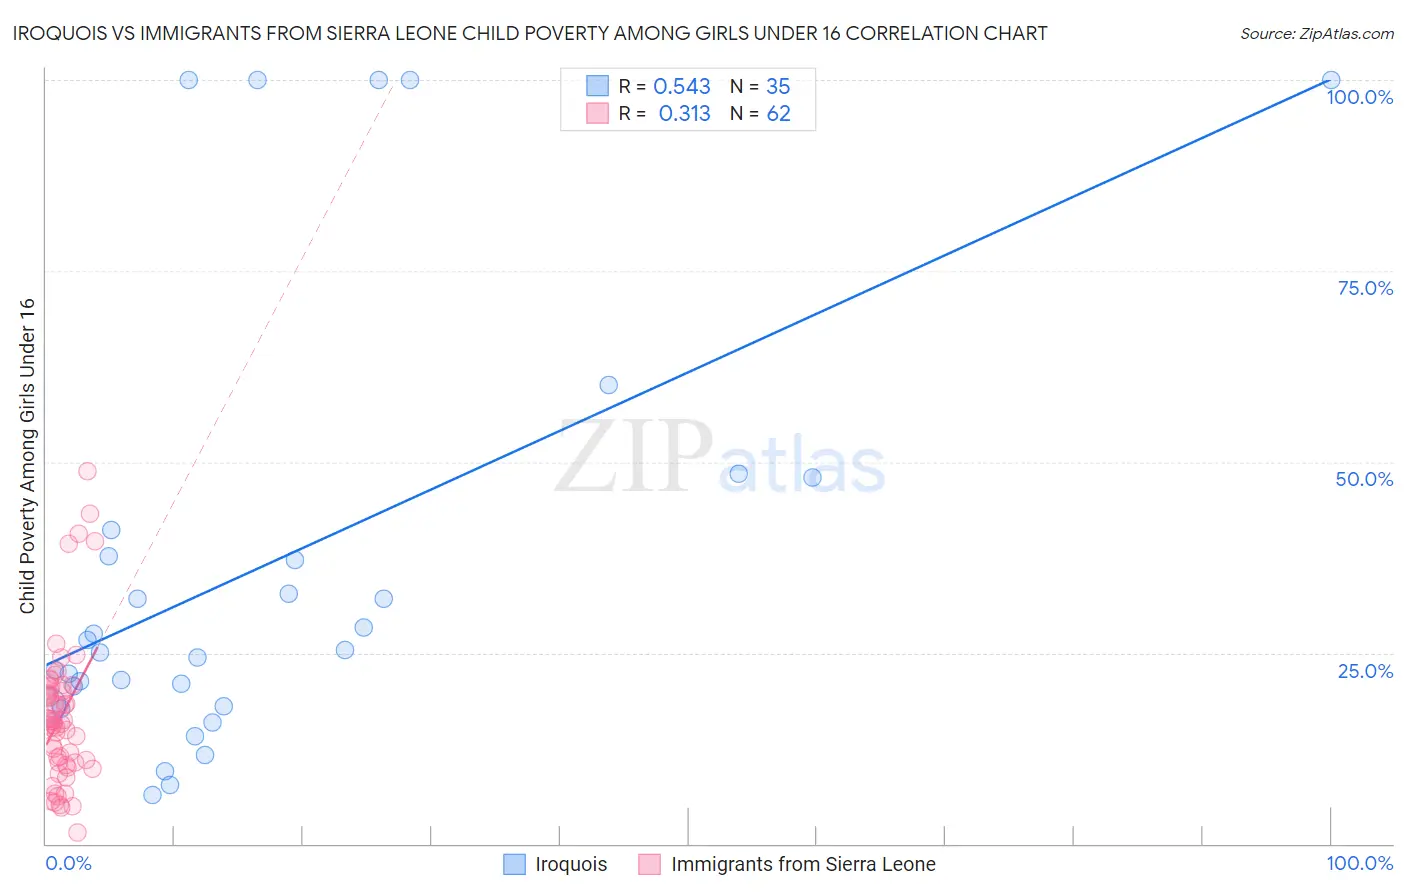 Iroquois vs Immigrants from Sierra Leone Child Poverty Among Girls Under 16